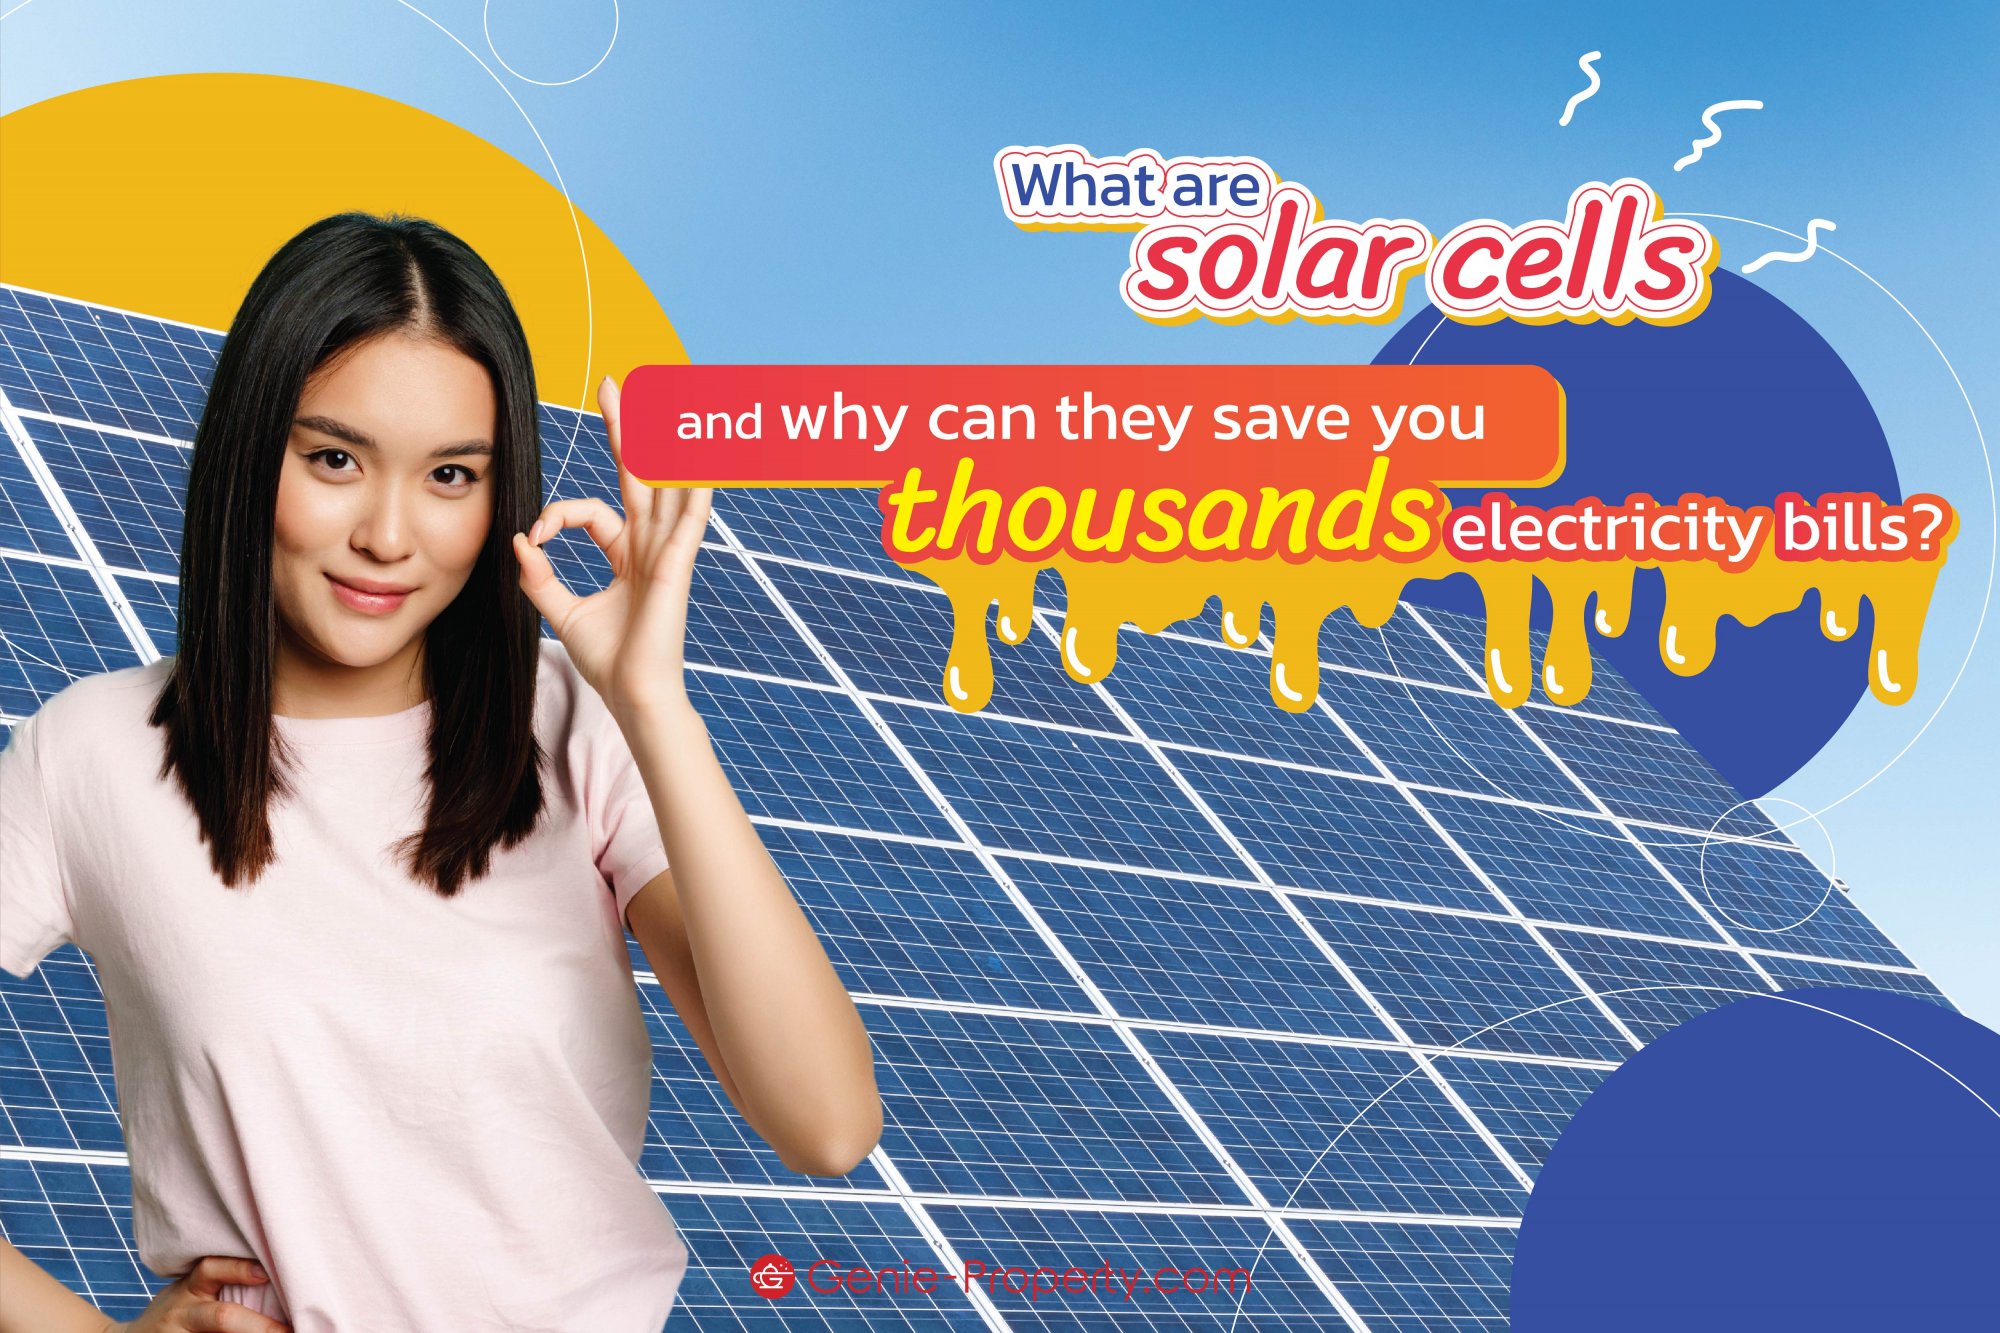 image for What are solar cells, and why can they save electricity up to thousands?